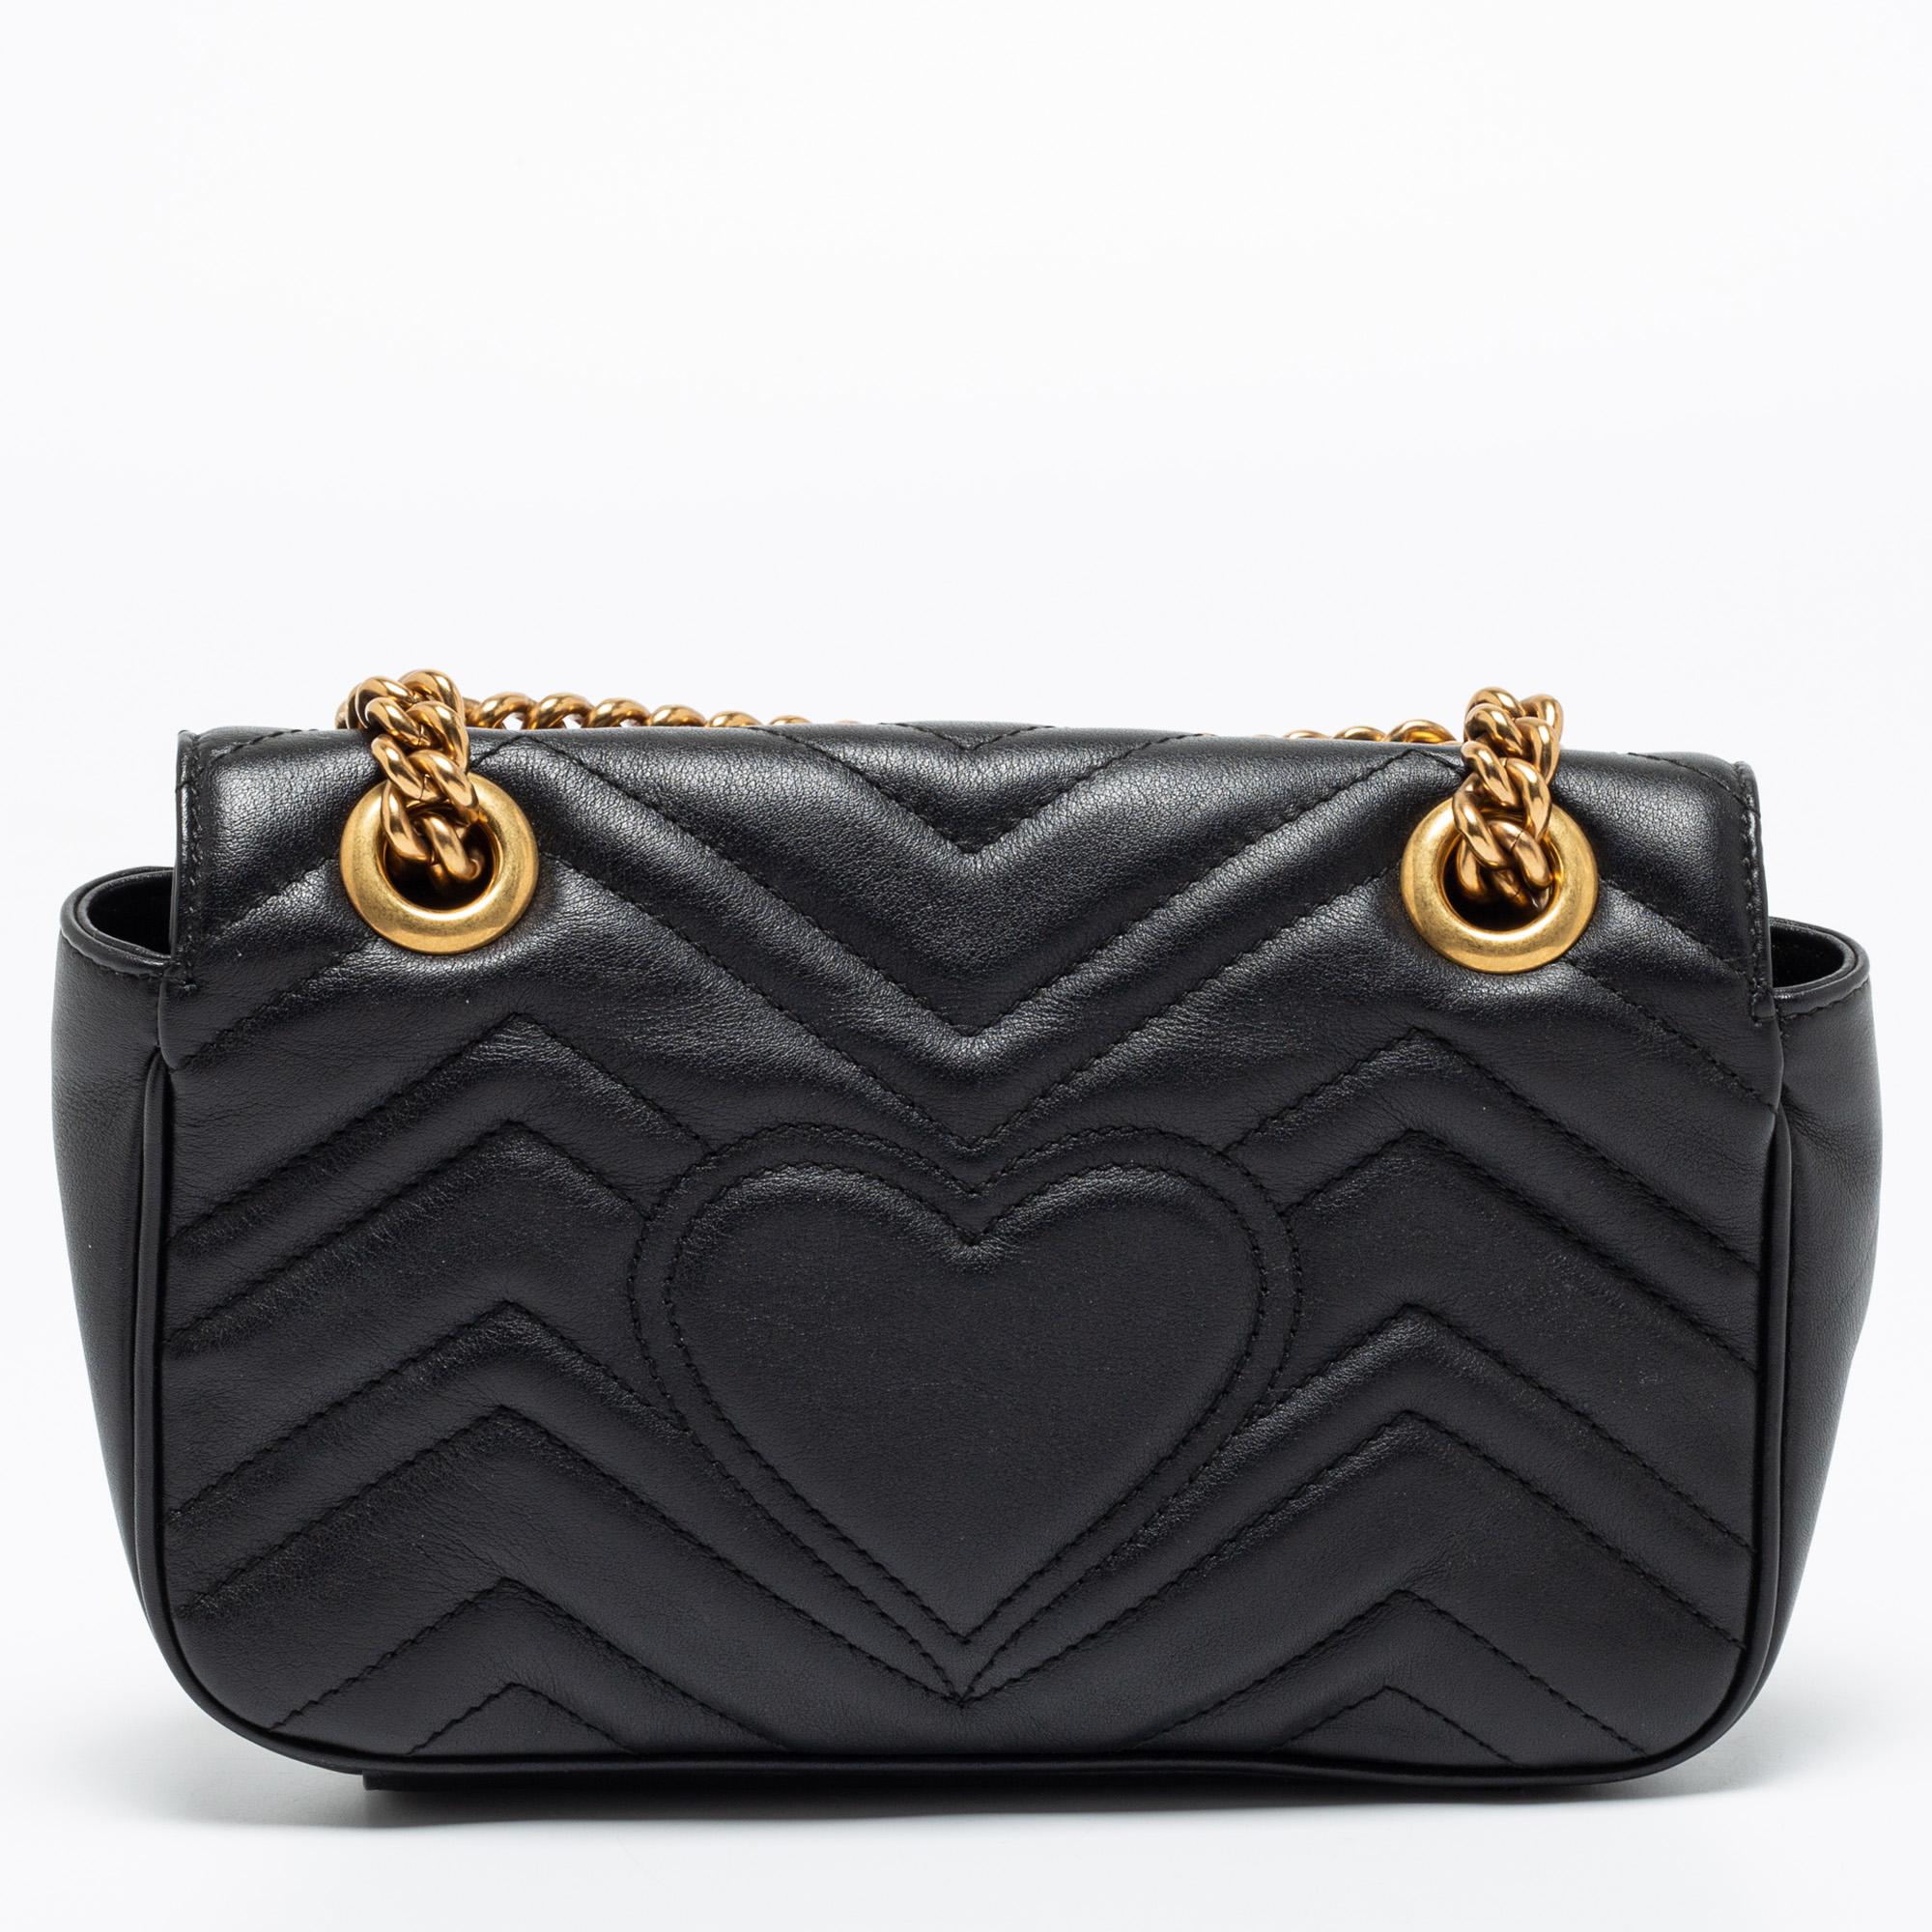 This Mini Gucci GG Marmont shoulder bag is a timeless piece to last you season after season. This quilted bag is made of black leather and will suit all your needs. It has GG logo detailing, a long shoulder strap, and an Alcantara-lined